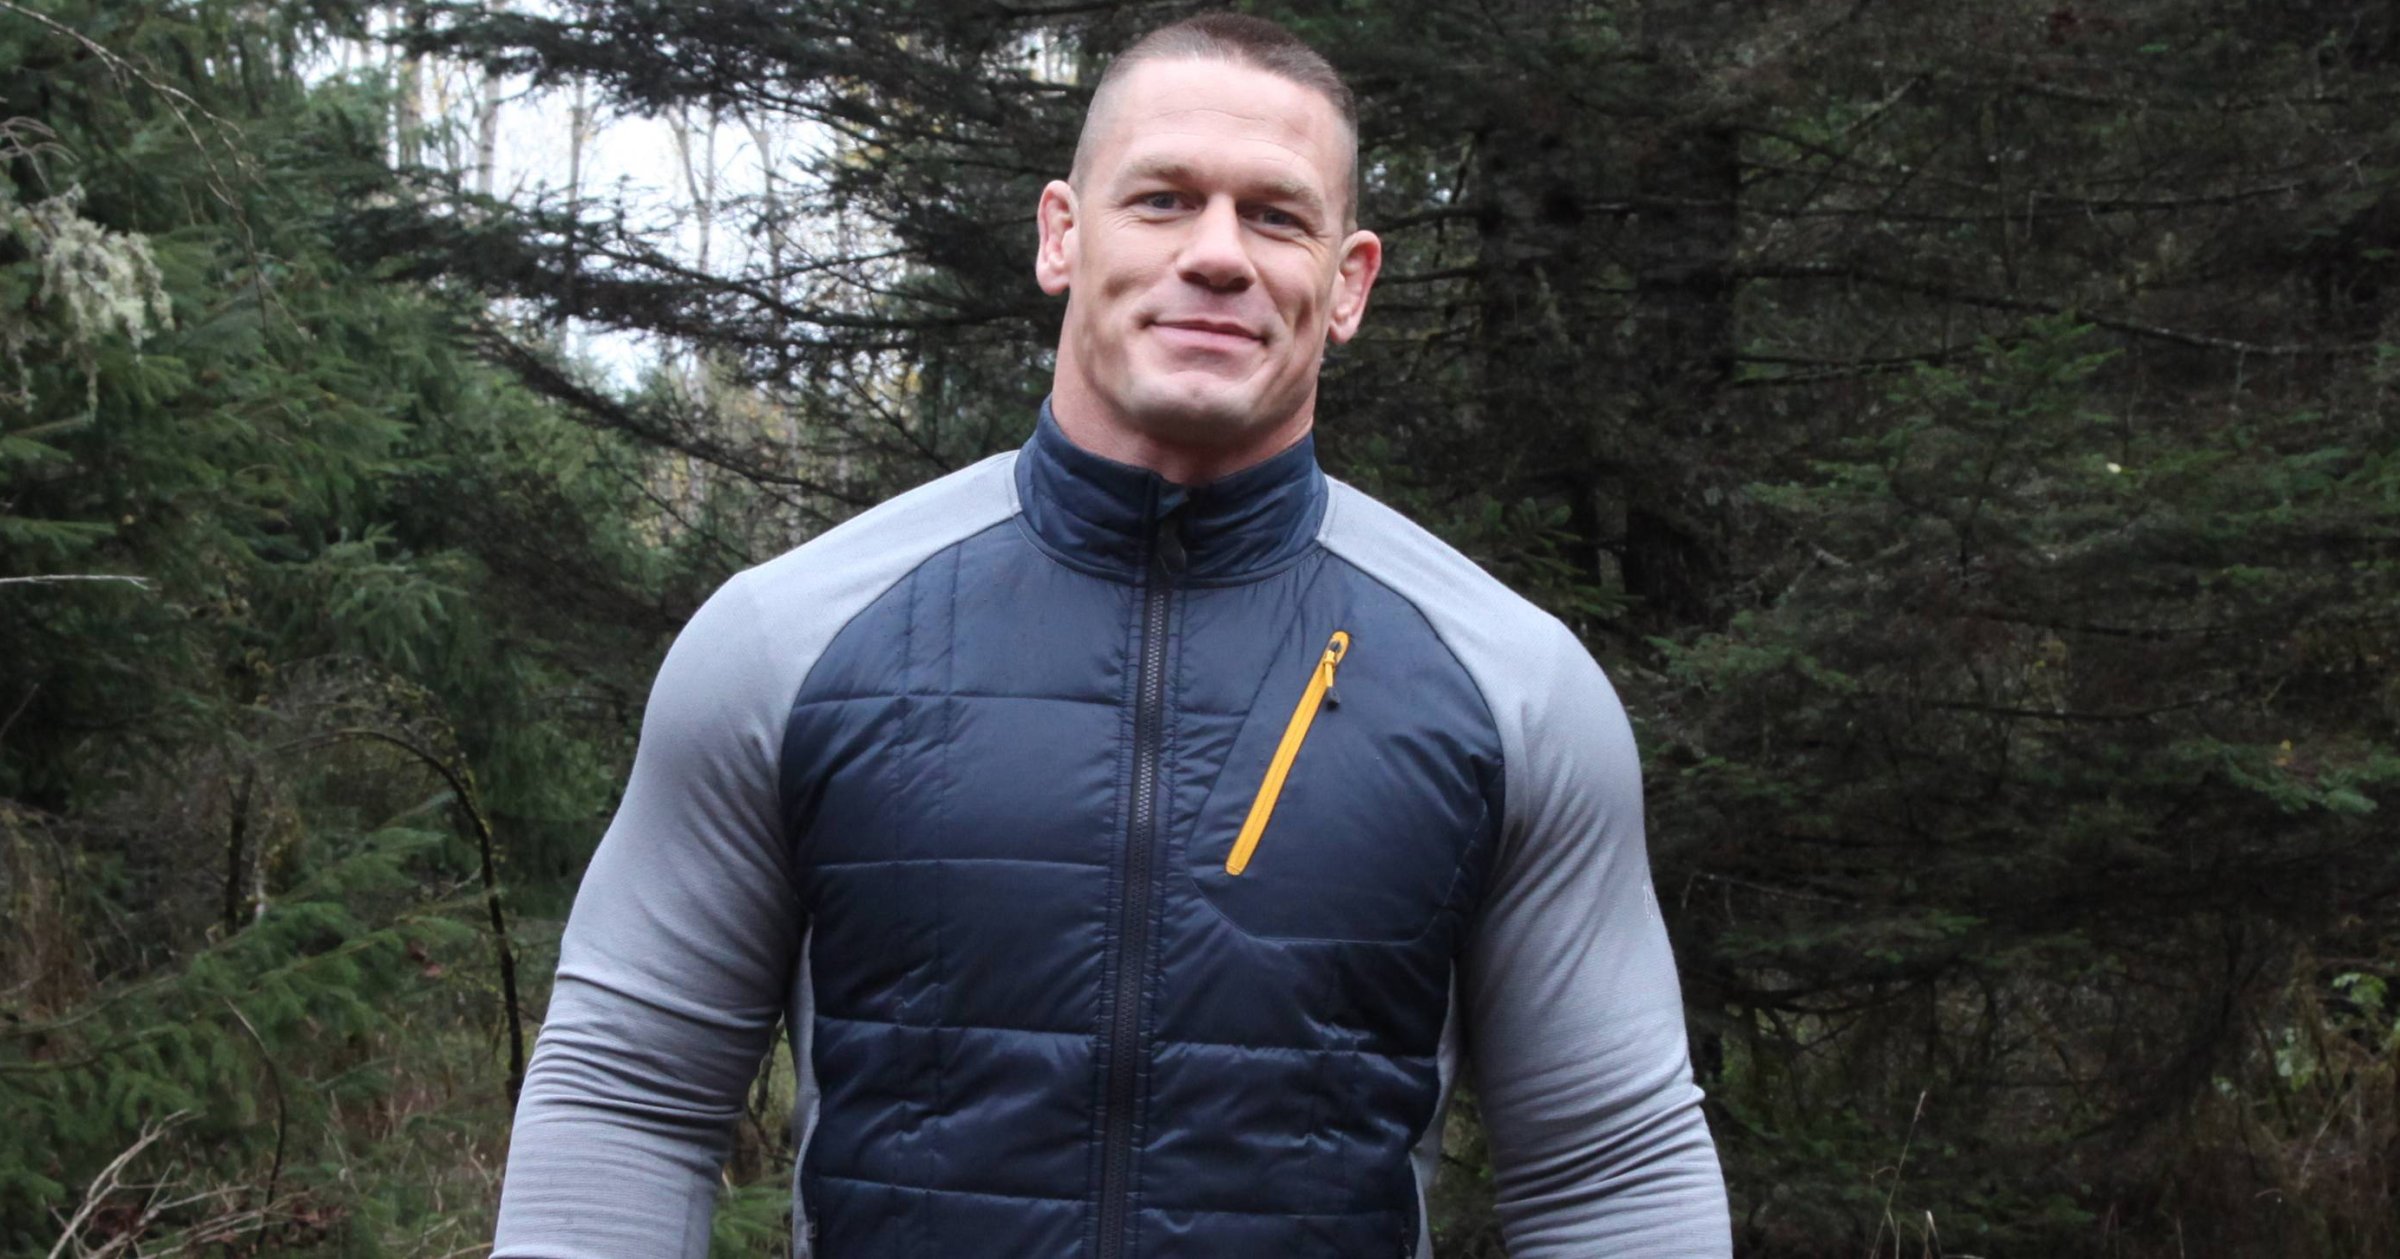 John Cena in the “Ruck Up” series premiere episode of American Grit.